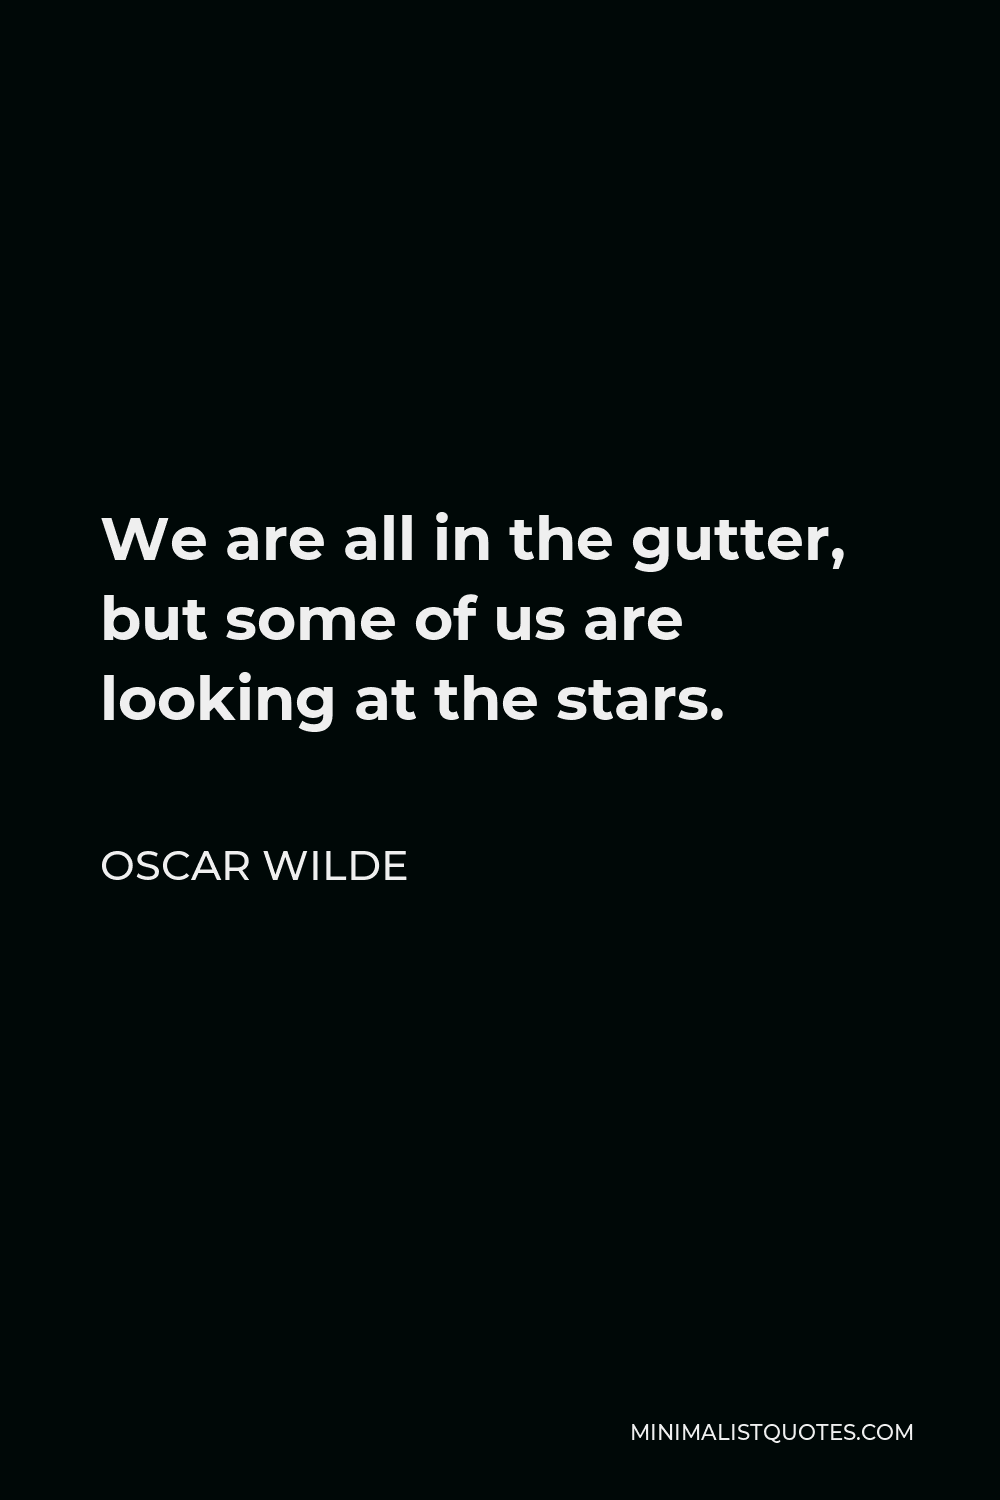 Oscar Wilde Quote - We are all in the gutter, but some of us are looking at the stars.